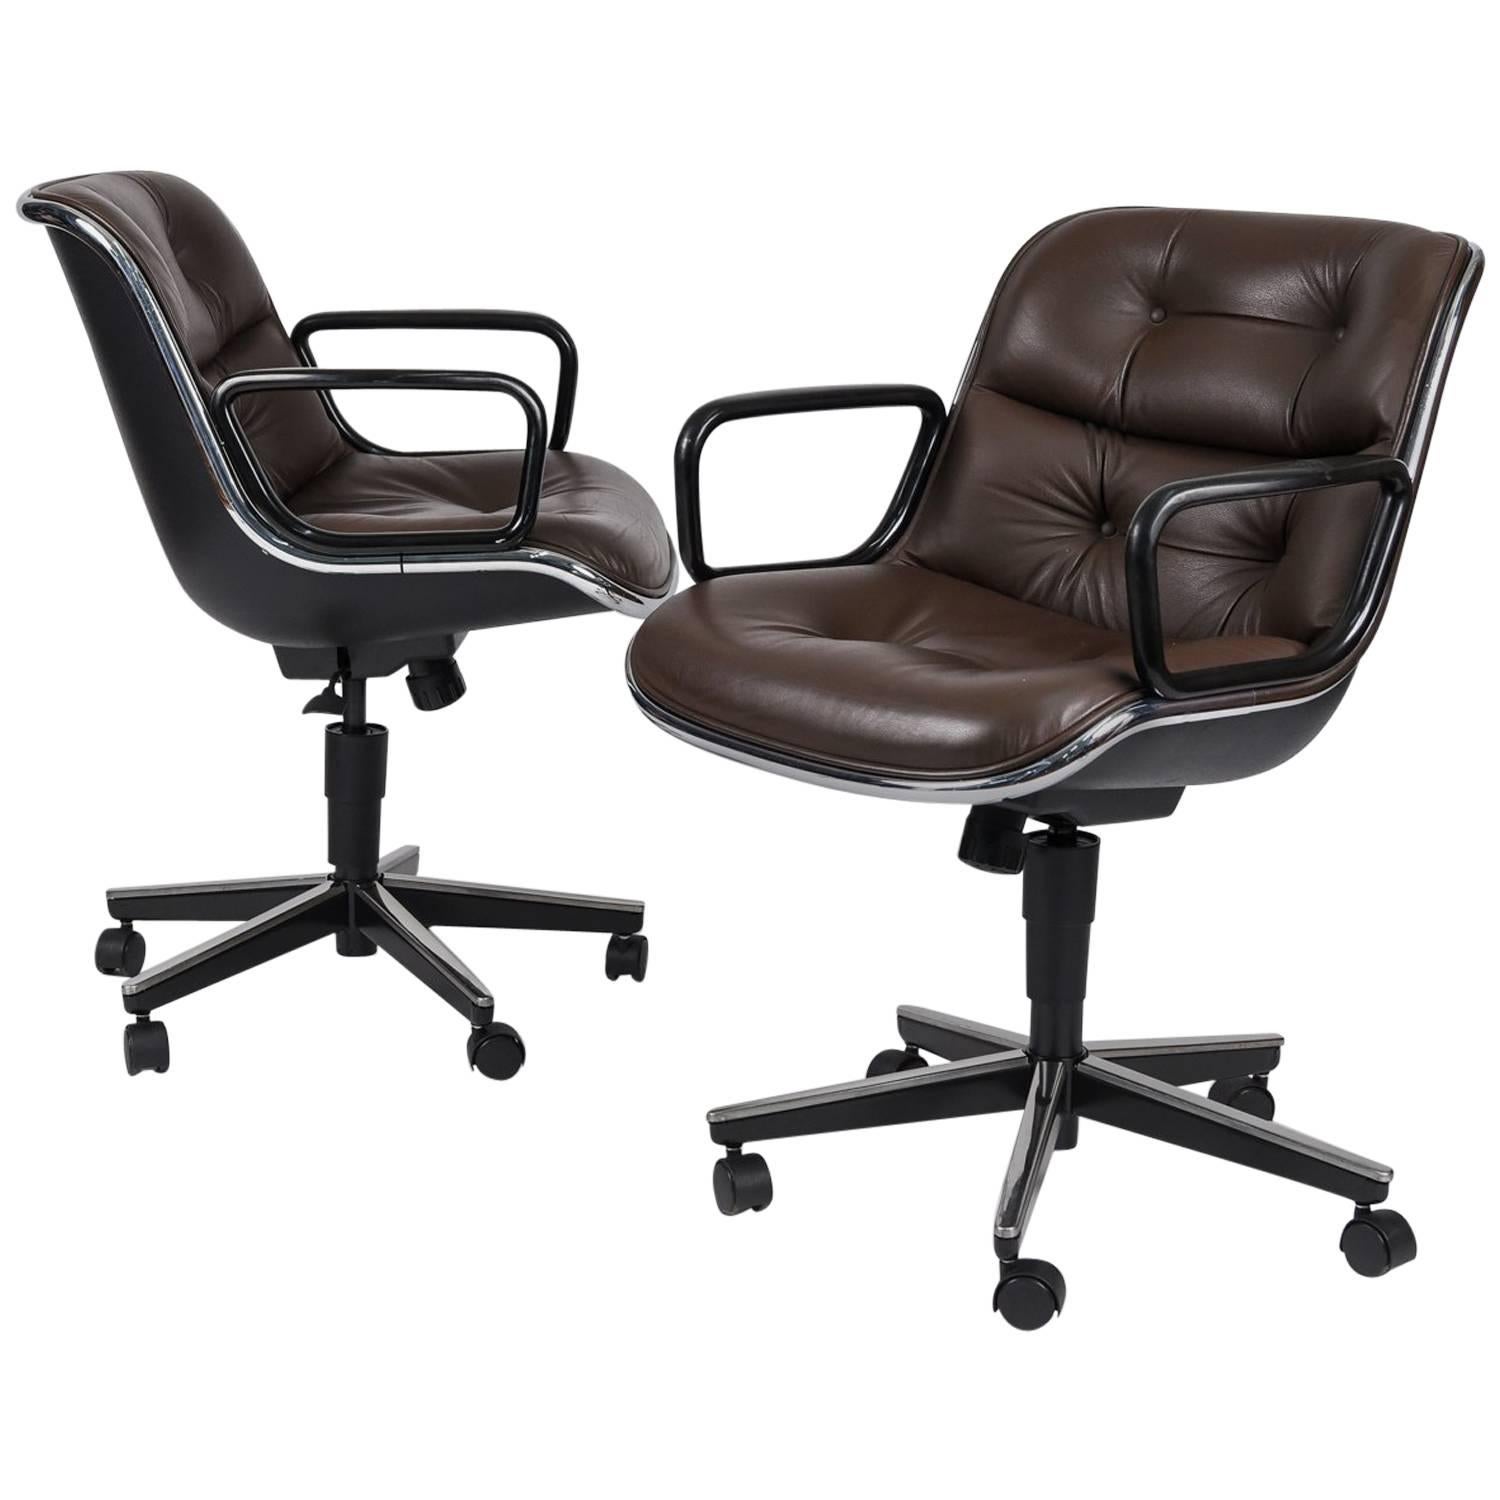 Ten Charles Pollock for Knoll Executive Office Chairs in Brown Leather